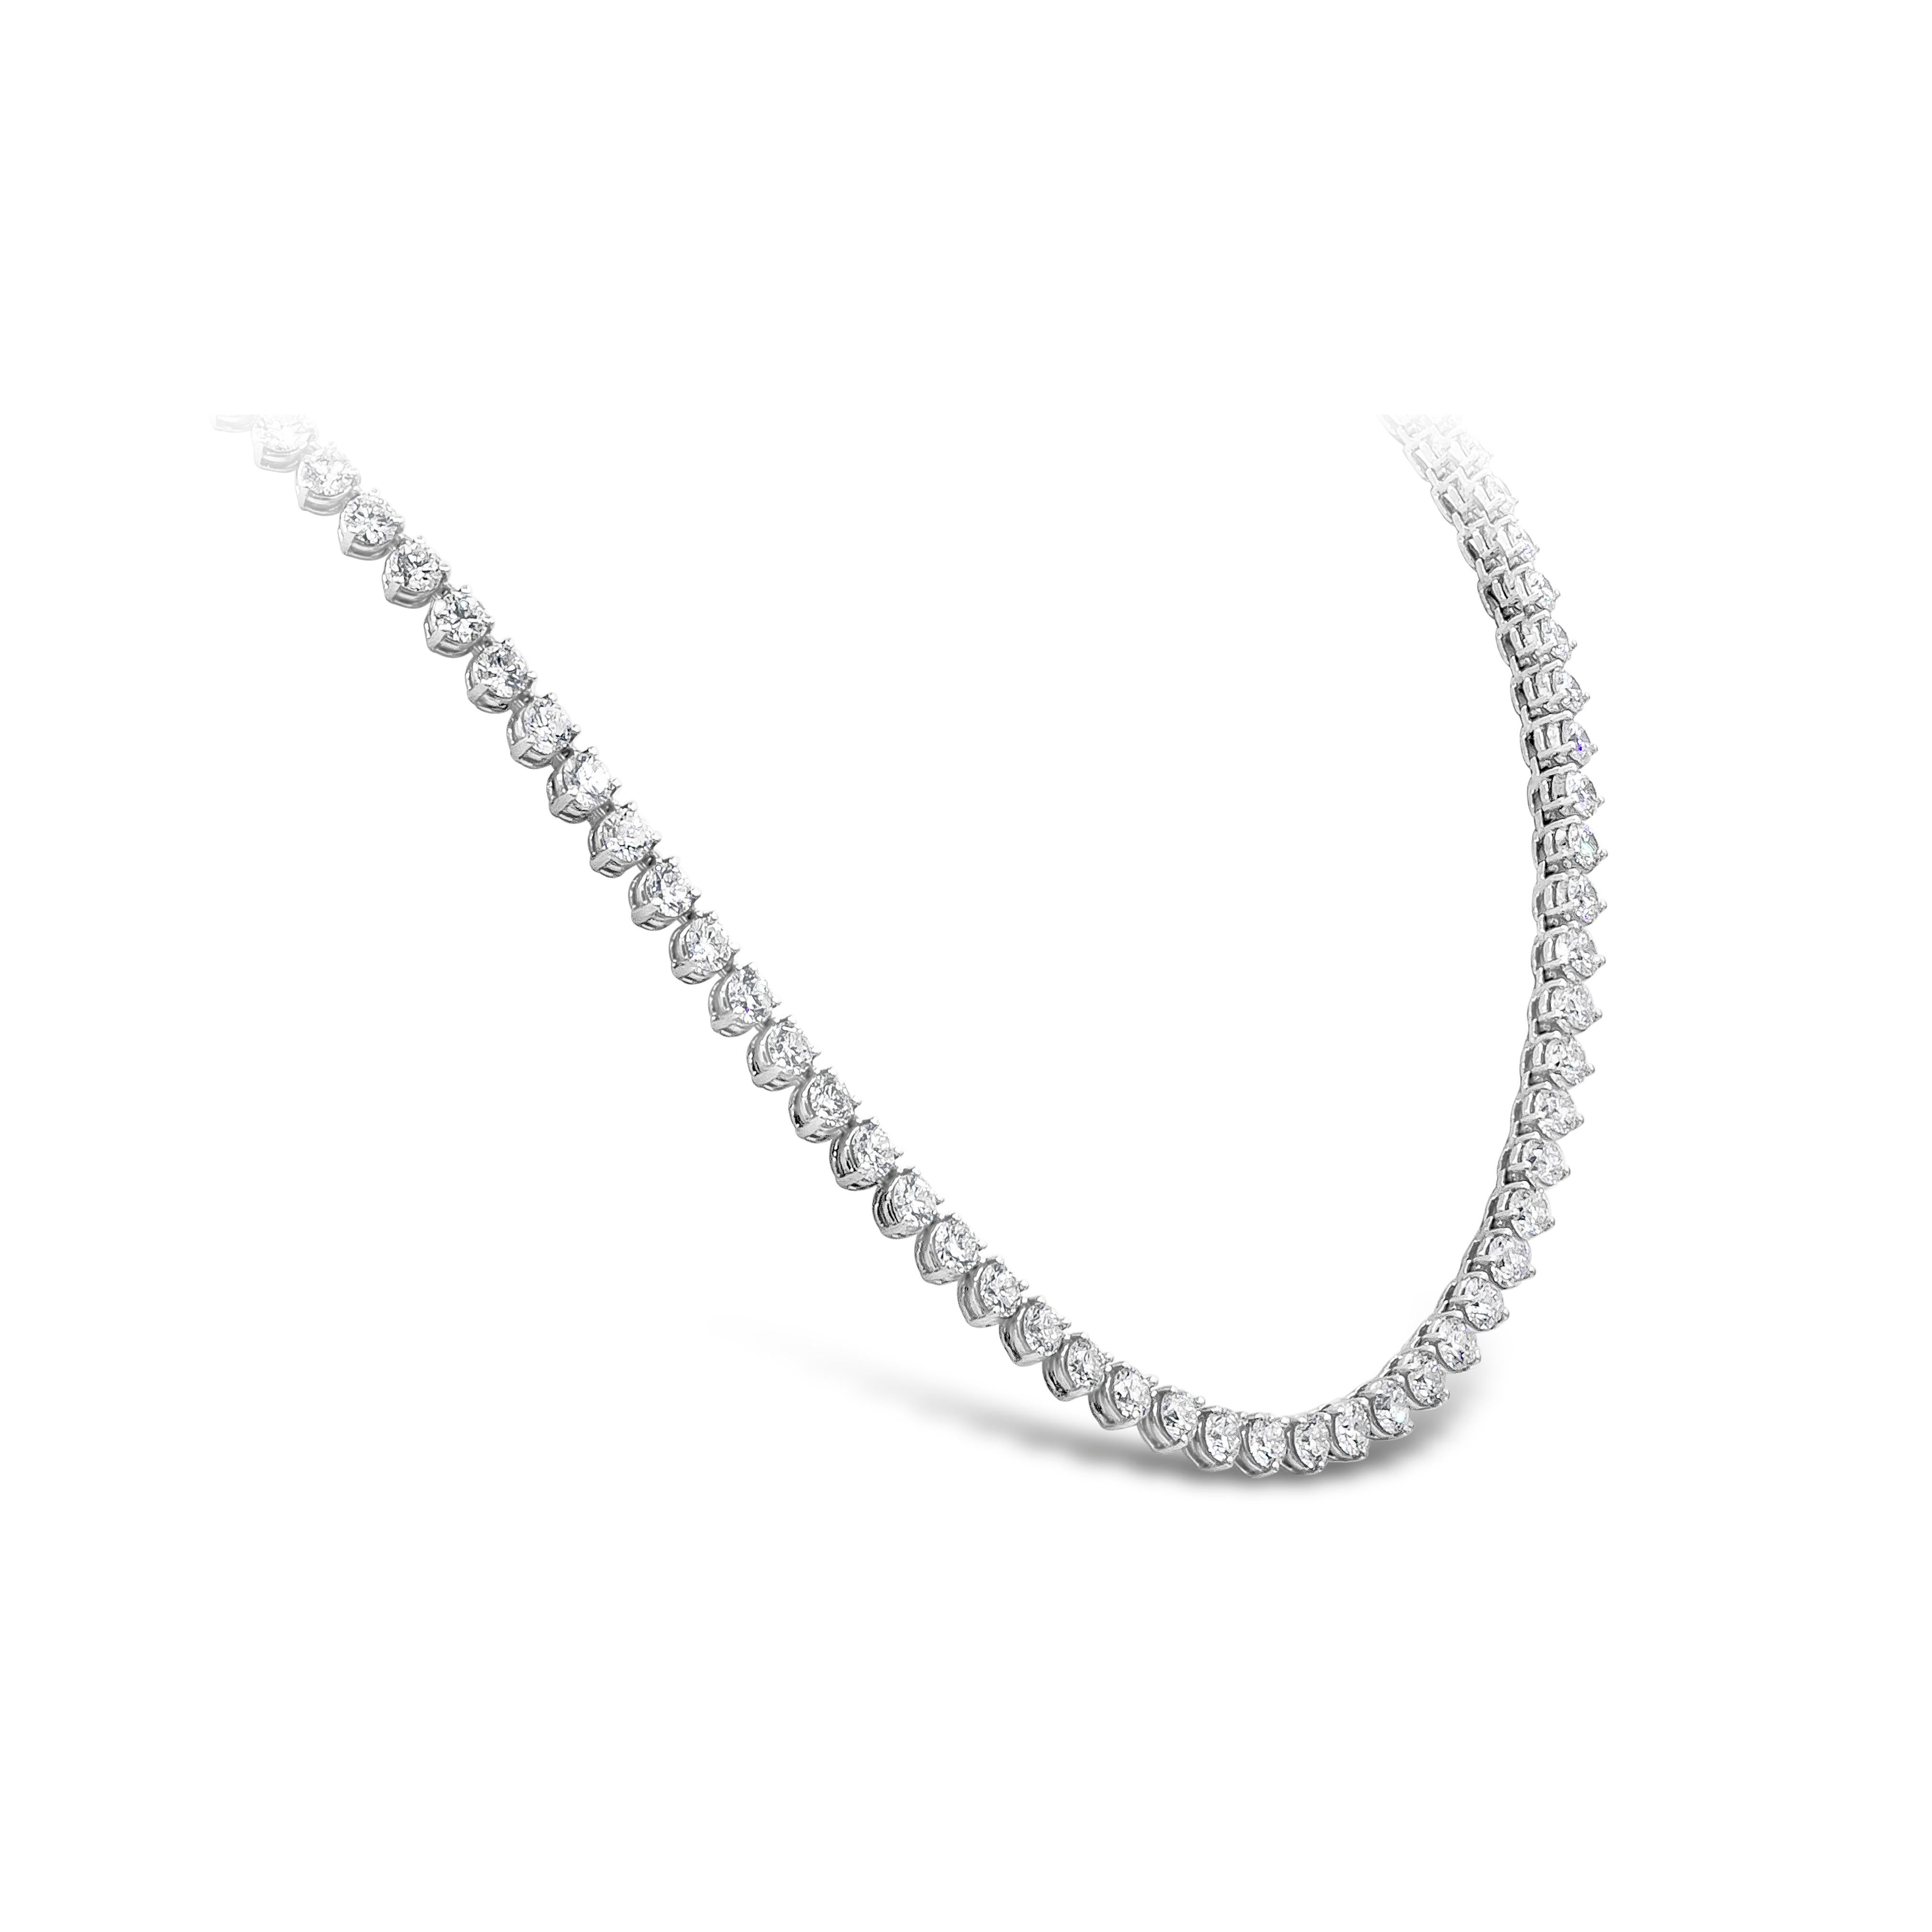 An elegant necklace showcasing 172 pieces of round brilliant diamonds weighing 43.58 carats total, each set in a three prong style setting. Made in 18k White Gold. Perfect for any occasion. 32 inches in Length. 